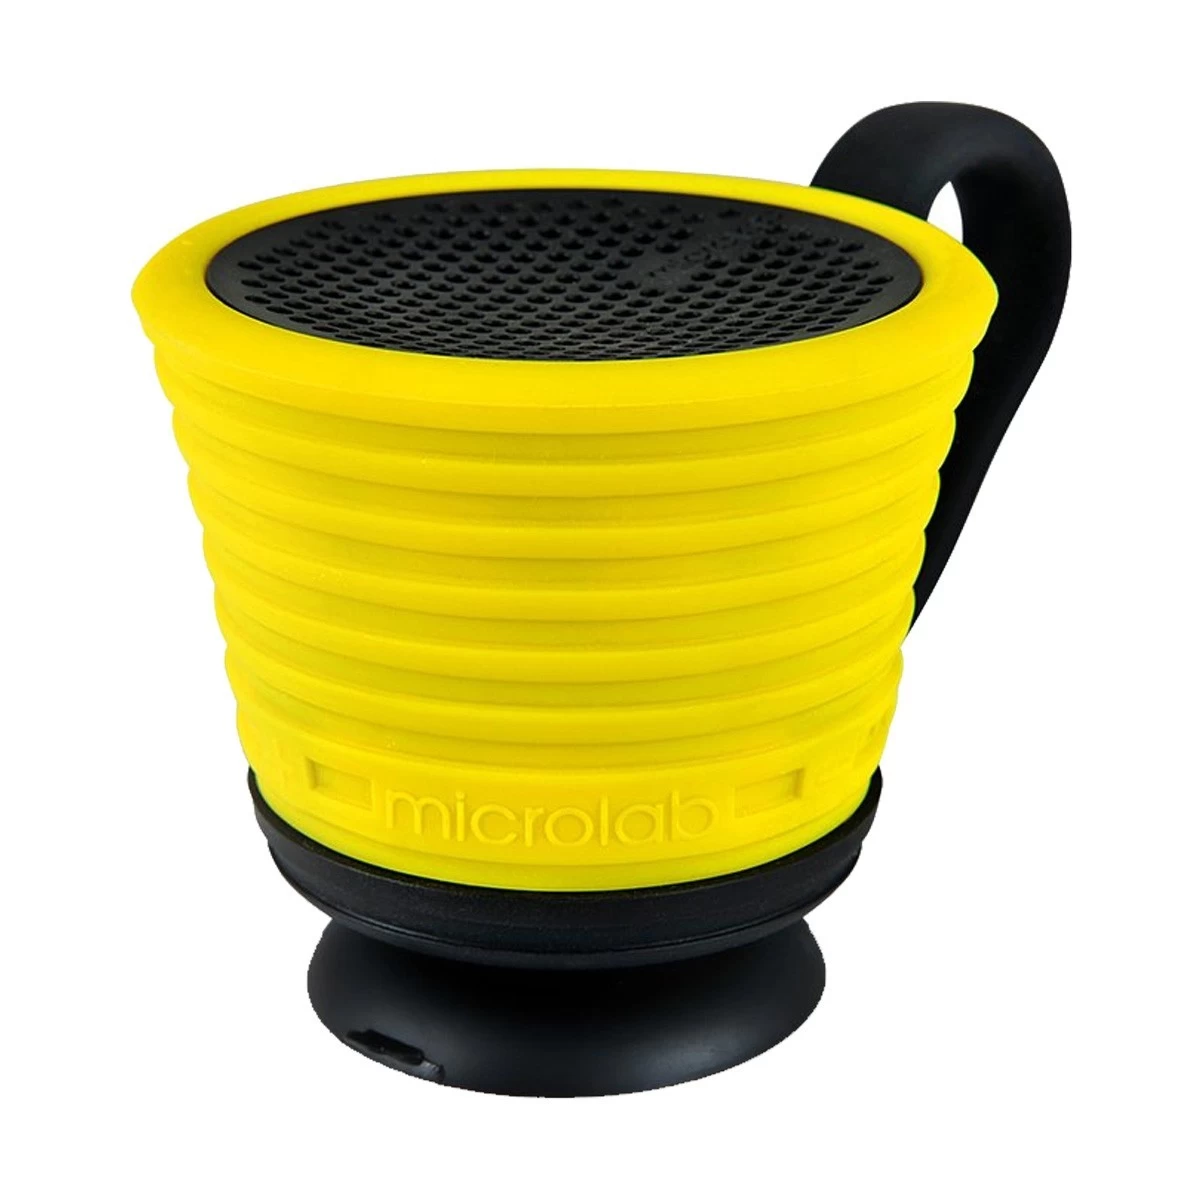 Microlab Magicup Portable Bluetooth Yellow Speaker